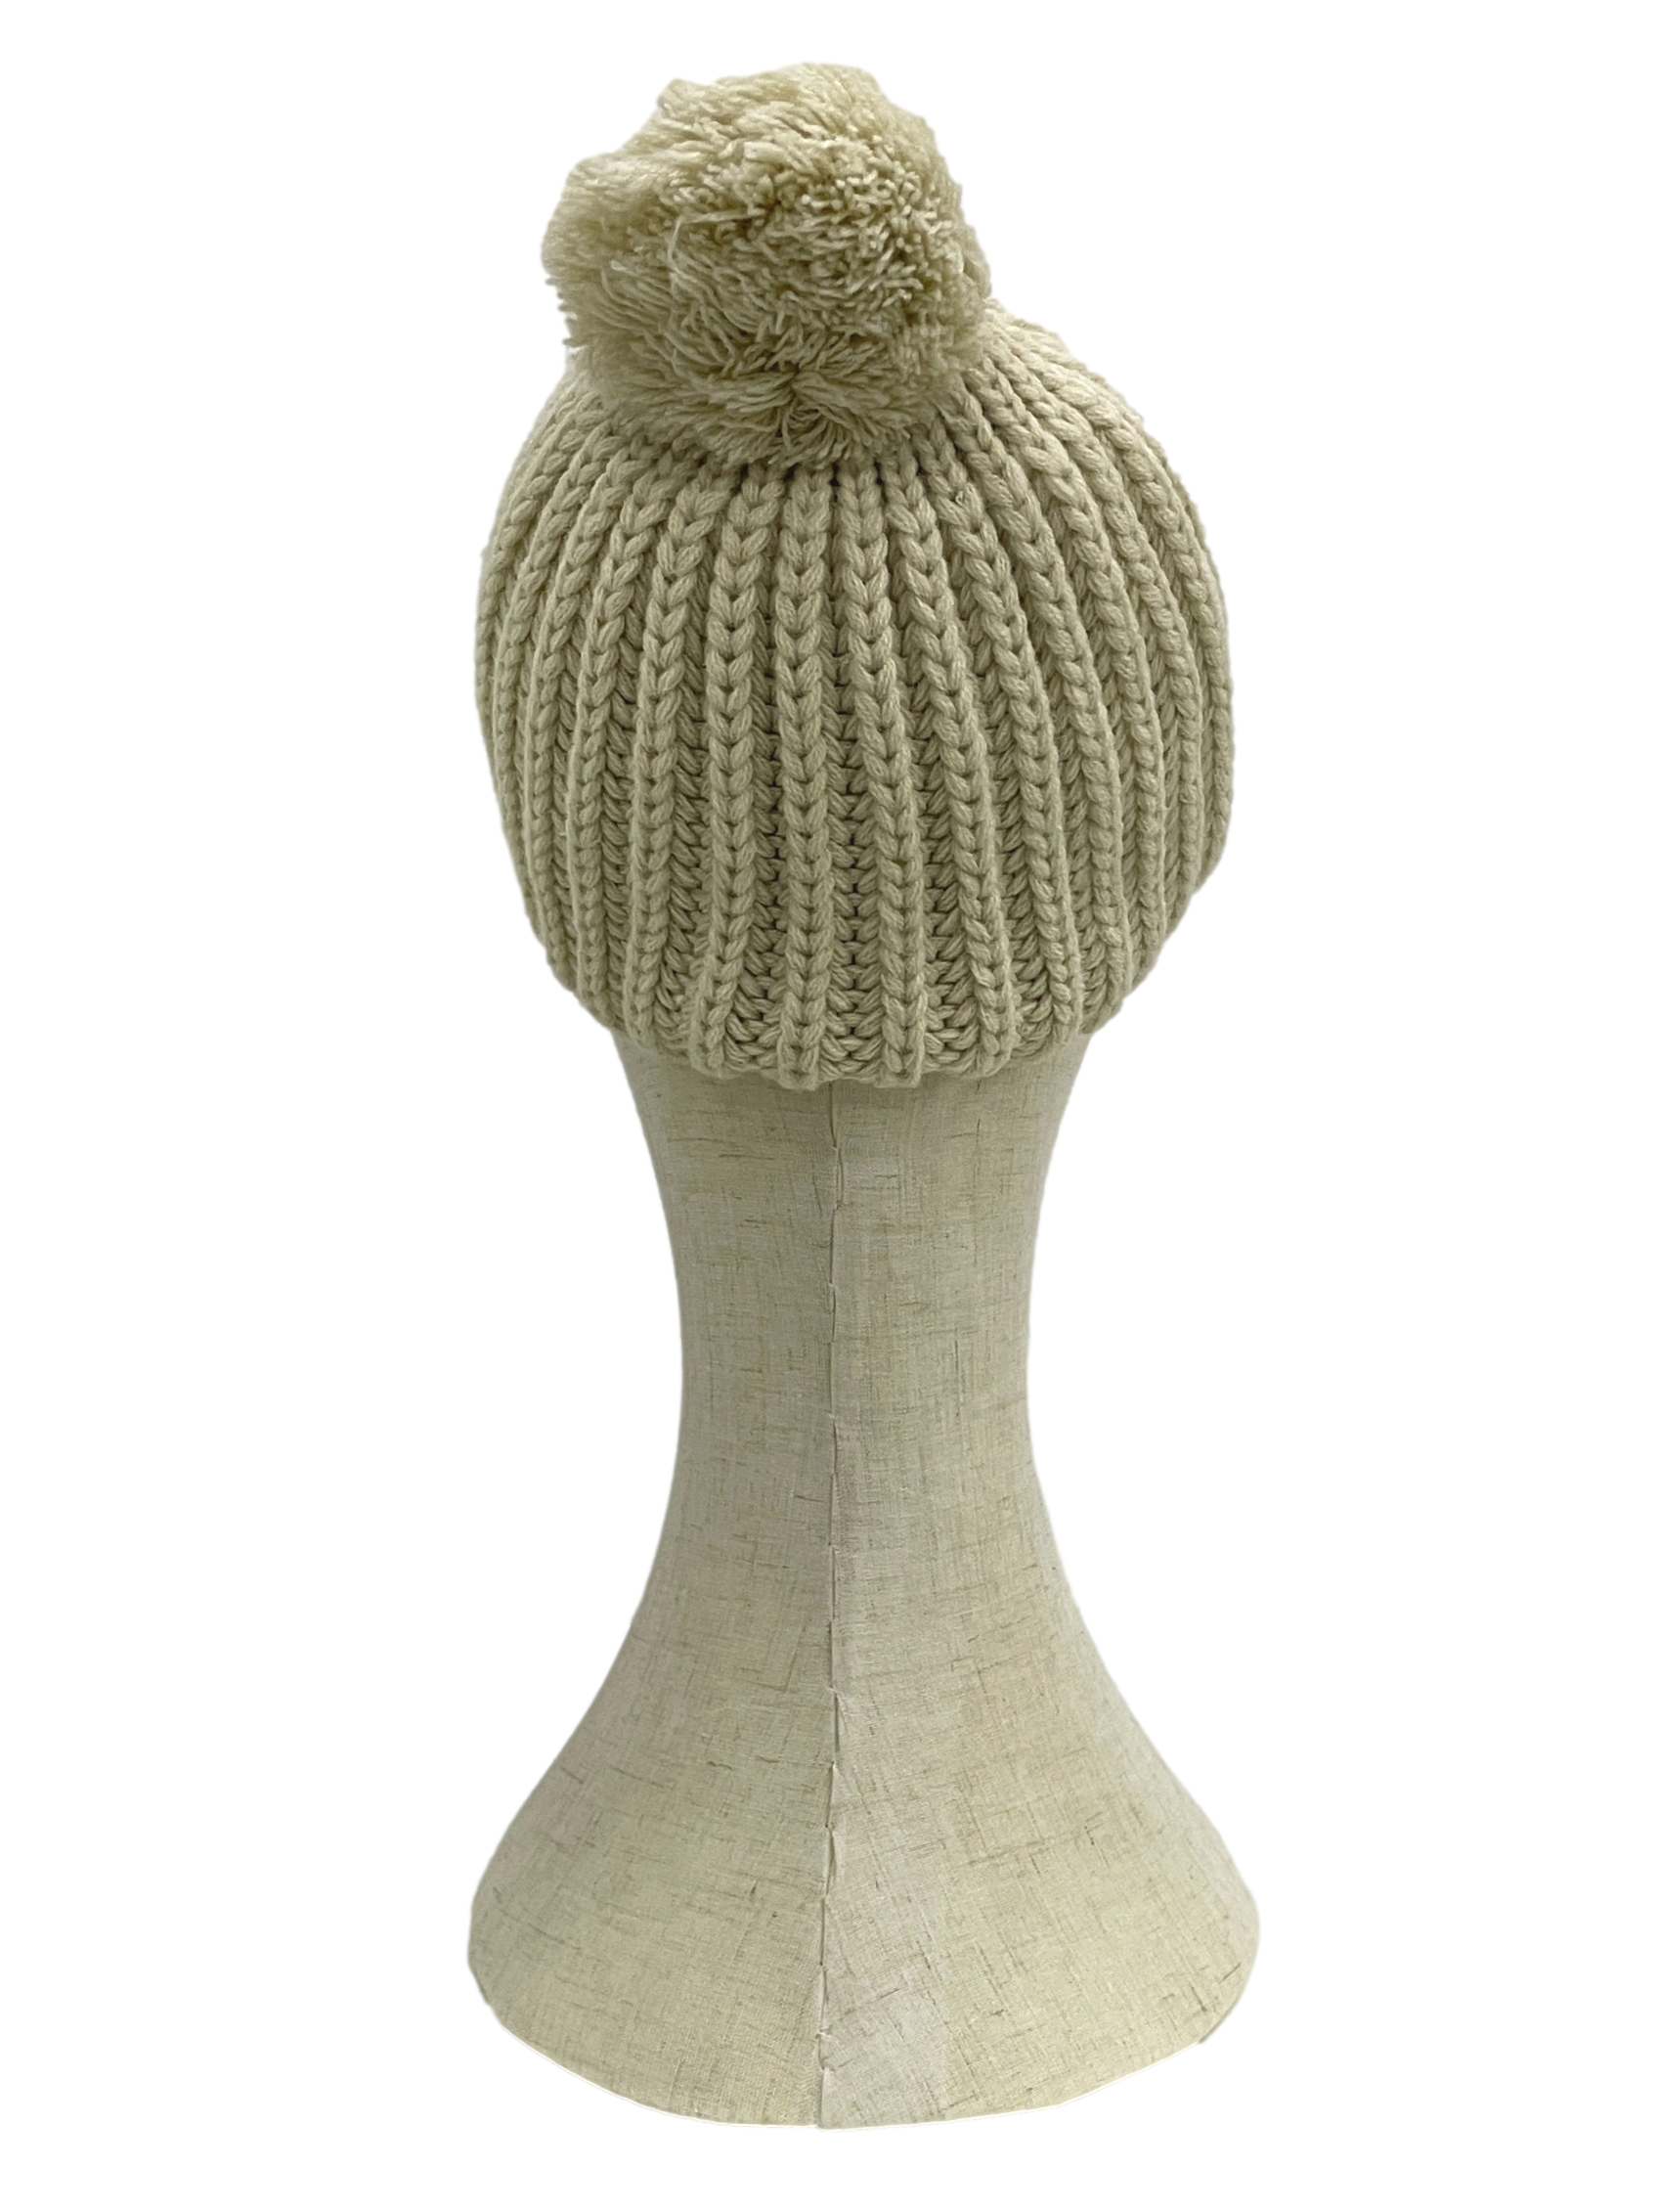 Ivory Knitted Snow Cap